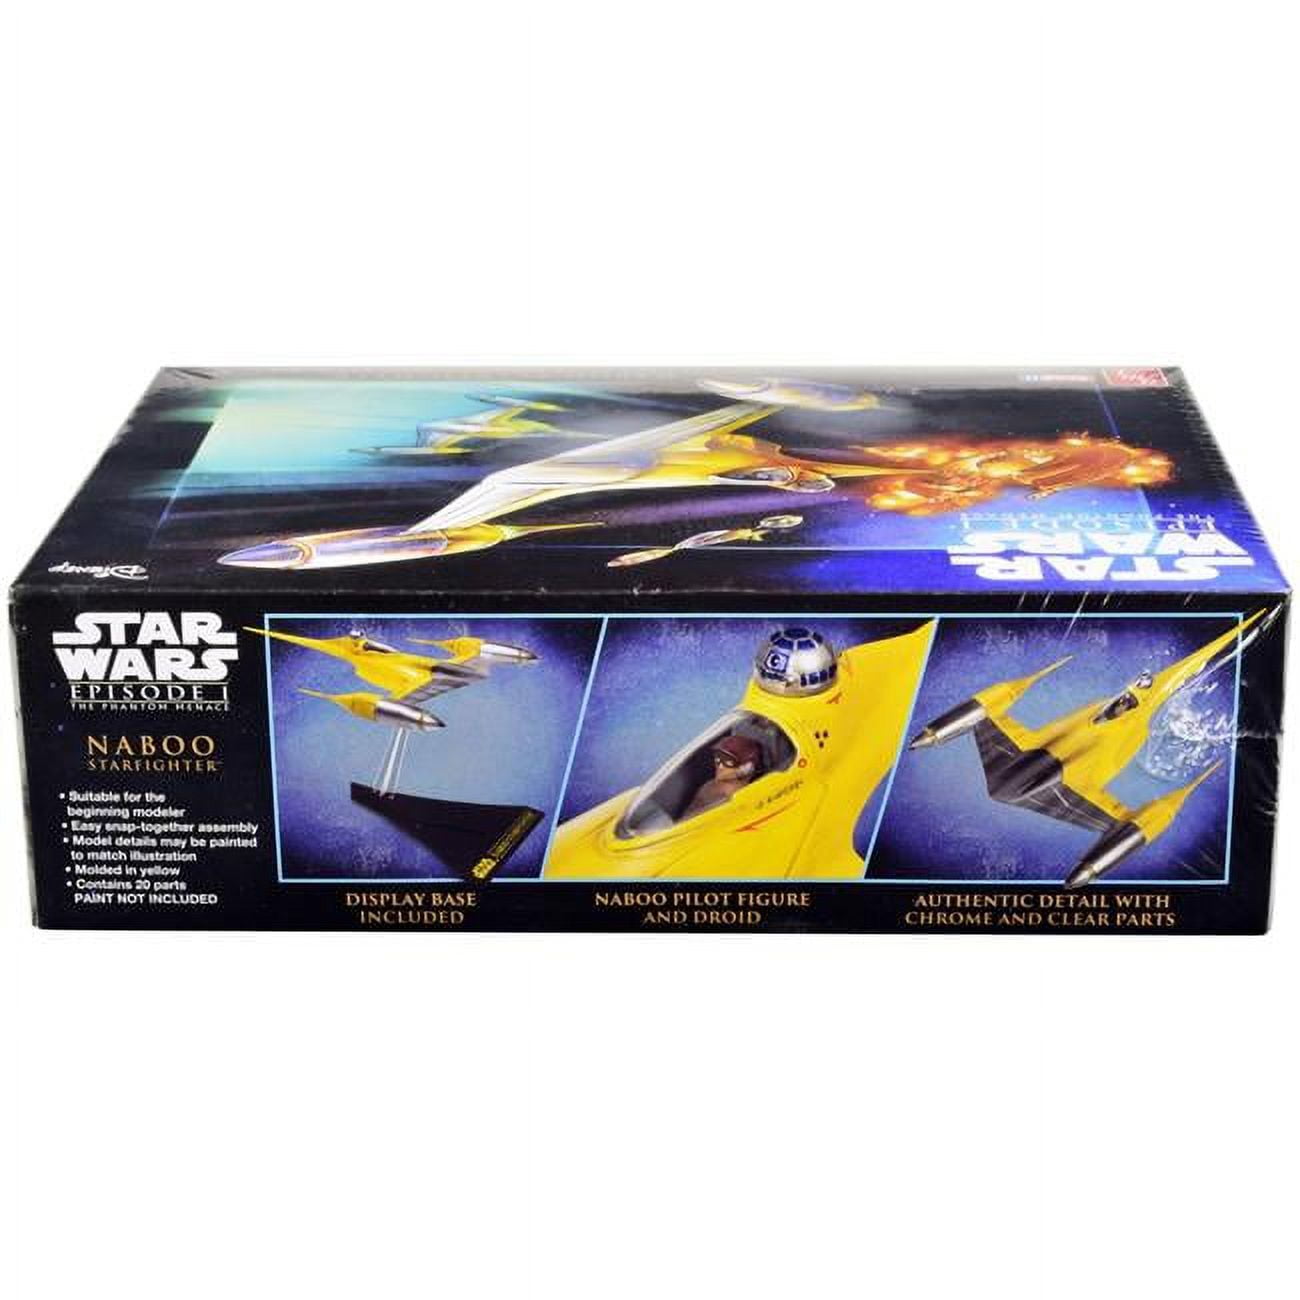 Picture of AMT AMT1376 Skill 2 Naboo Starfighter Spaceship Star Wars-Episode I-The Phantom Menace 1999 Movie 1-48 Scale Model Kit